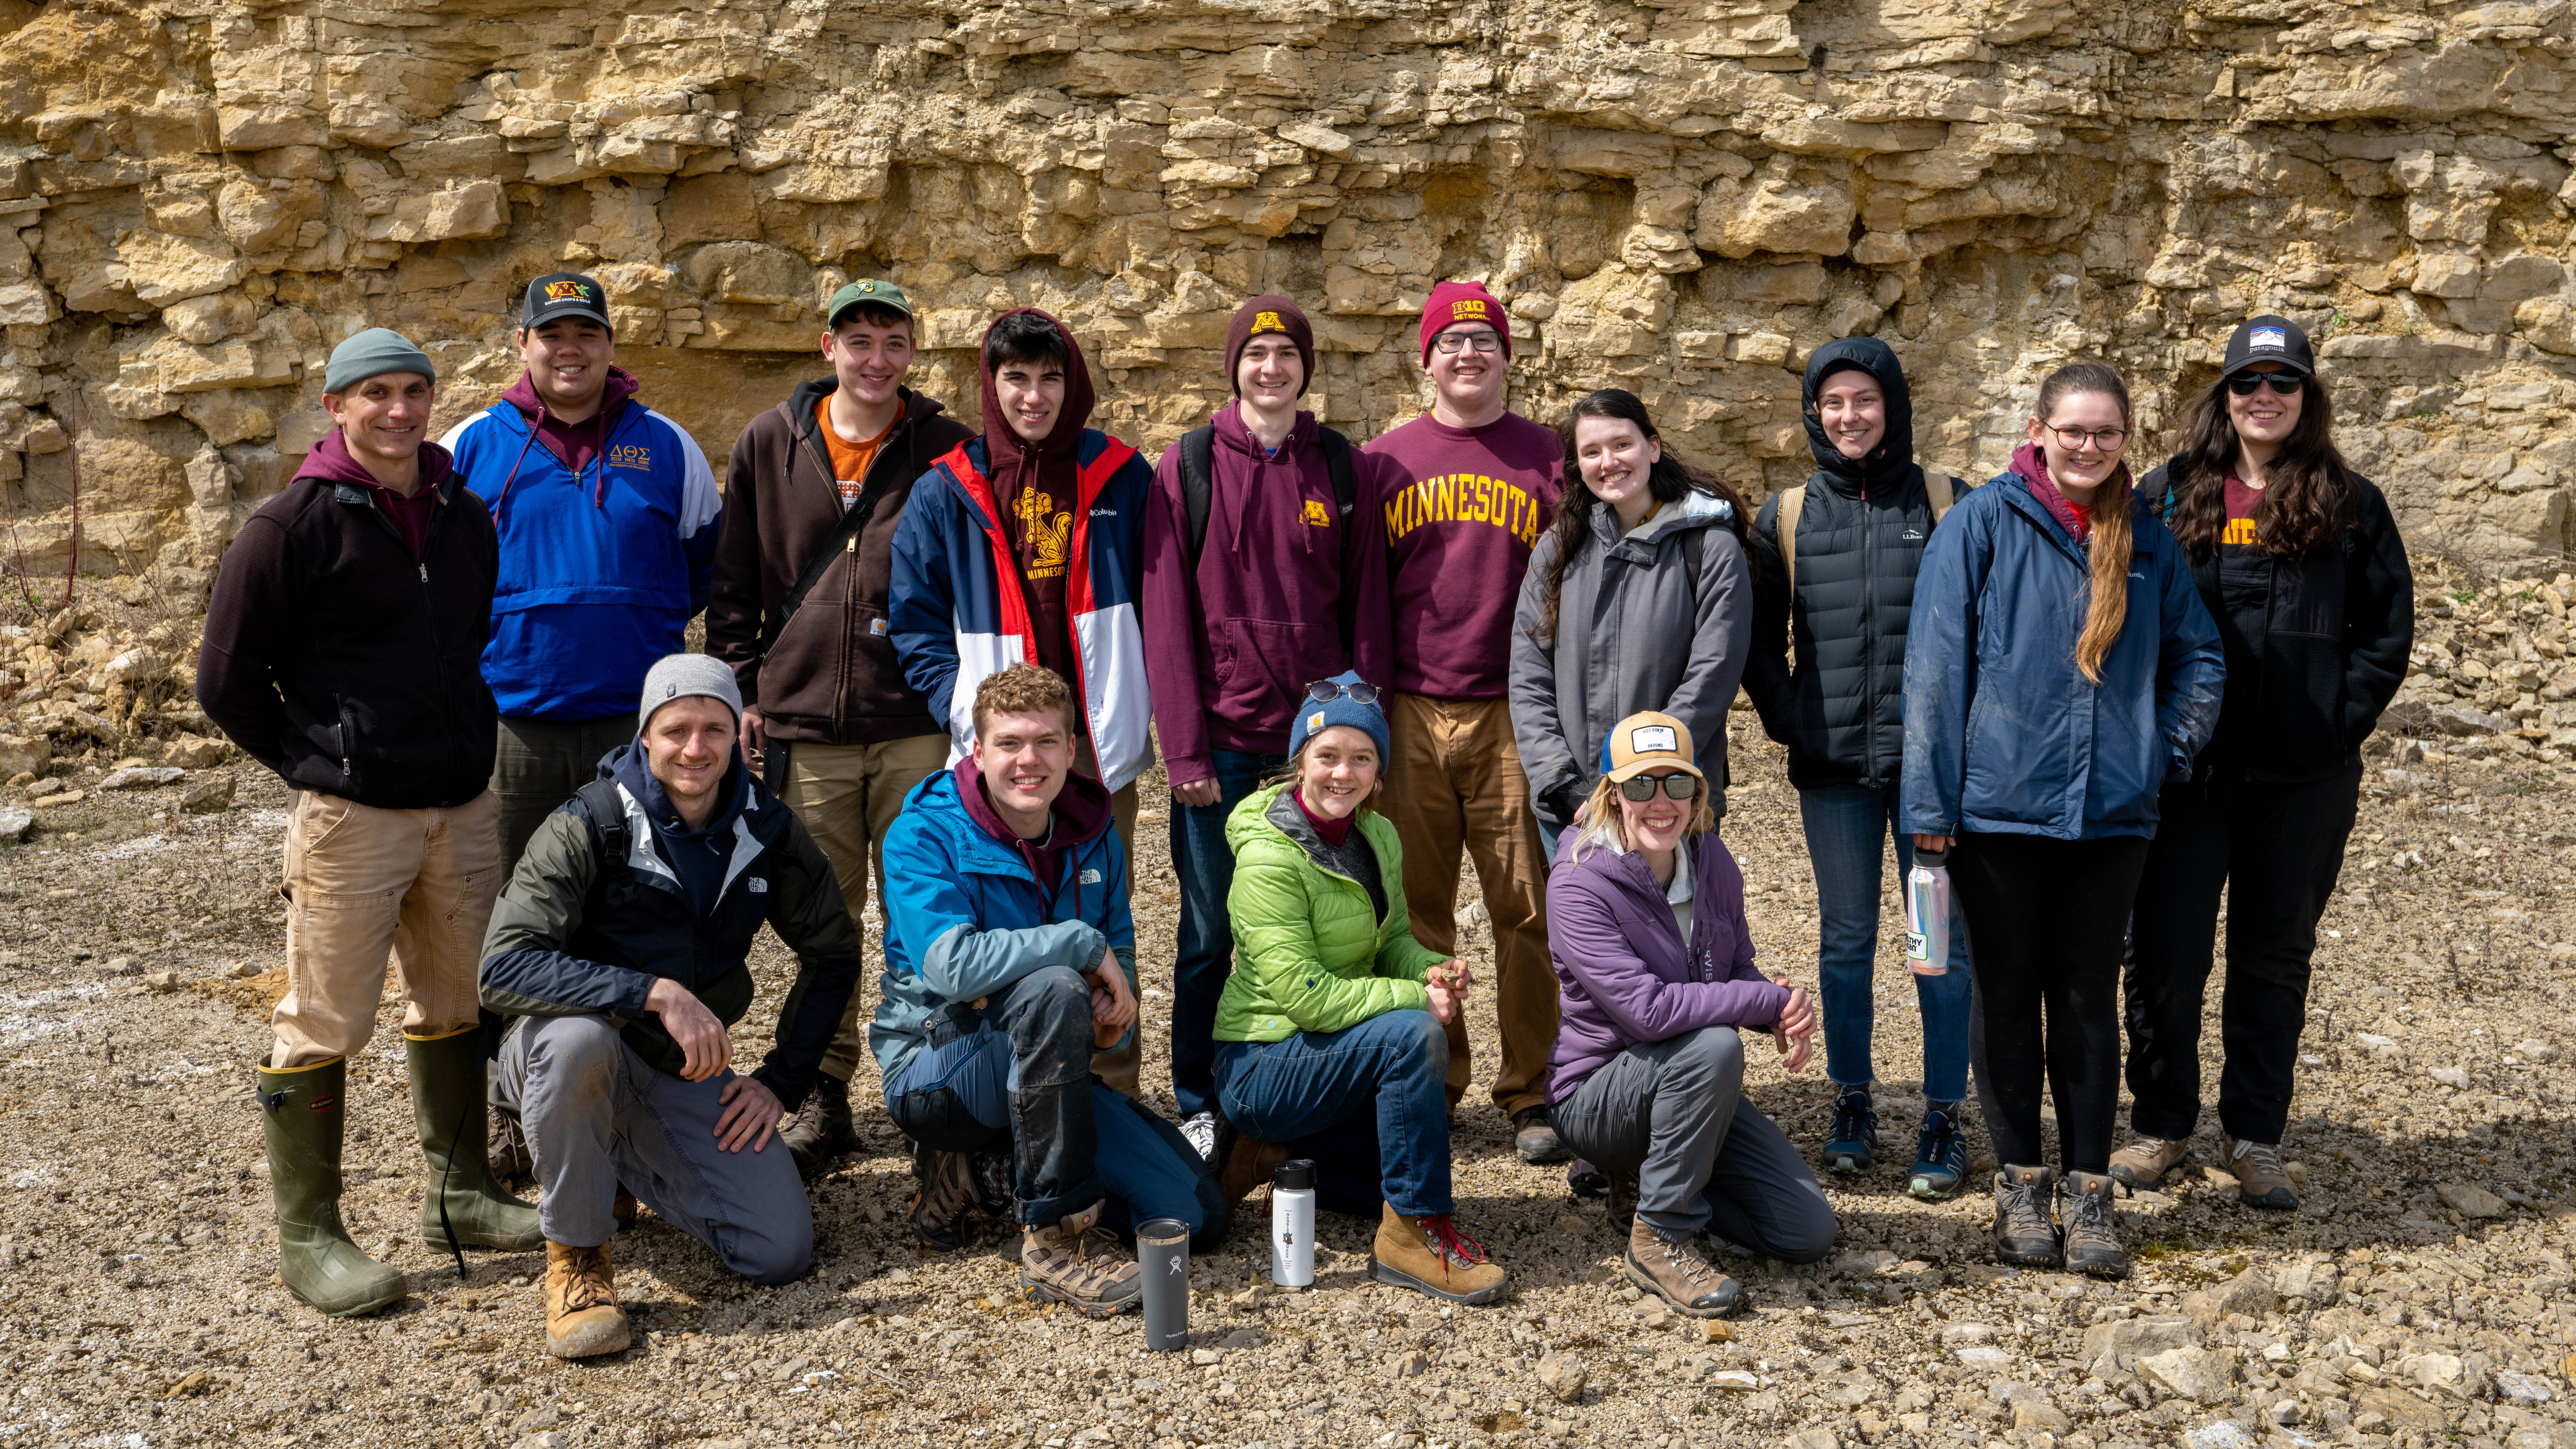 The 2022 UMN soil judging team standing in front of a sandstone bluff